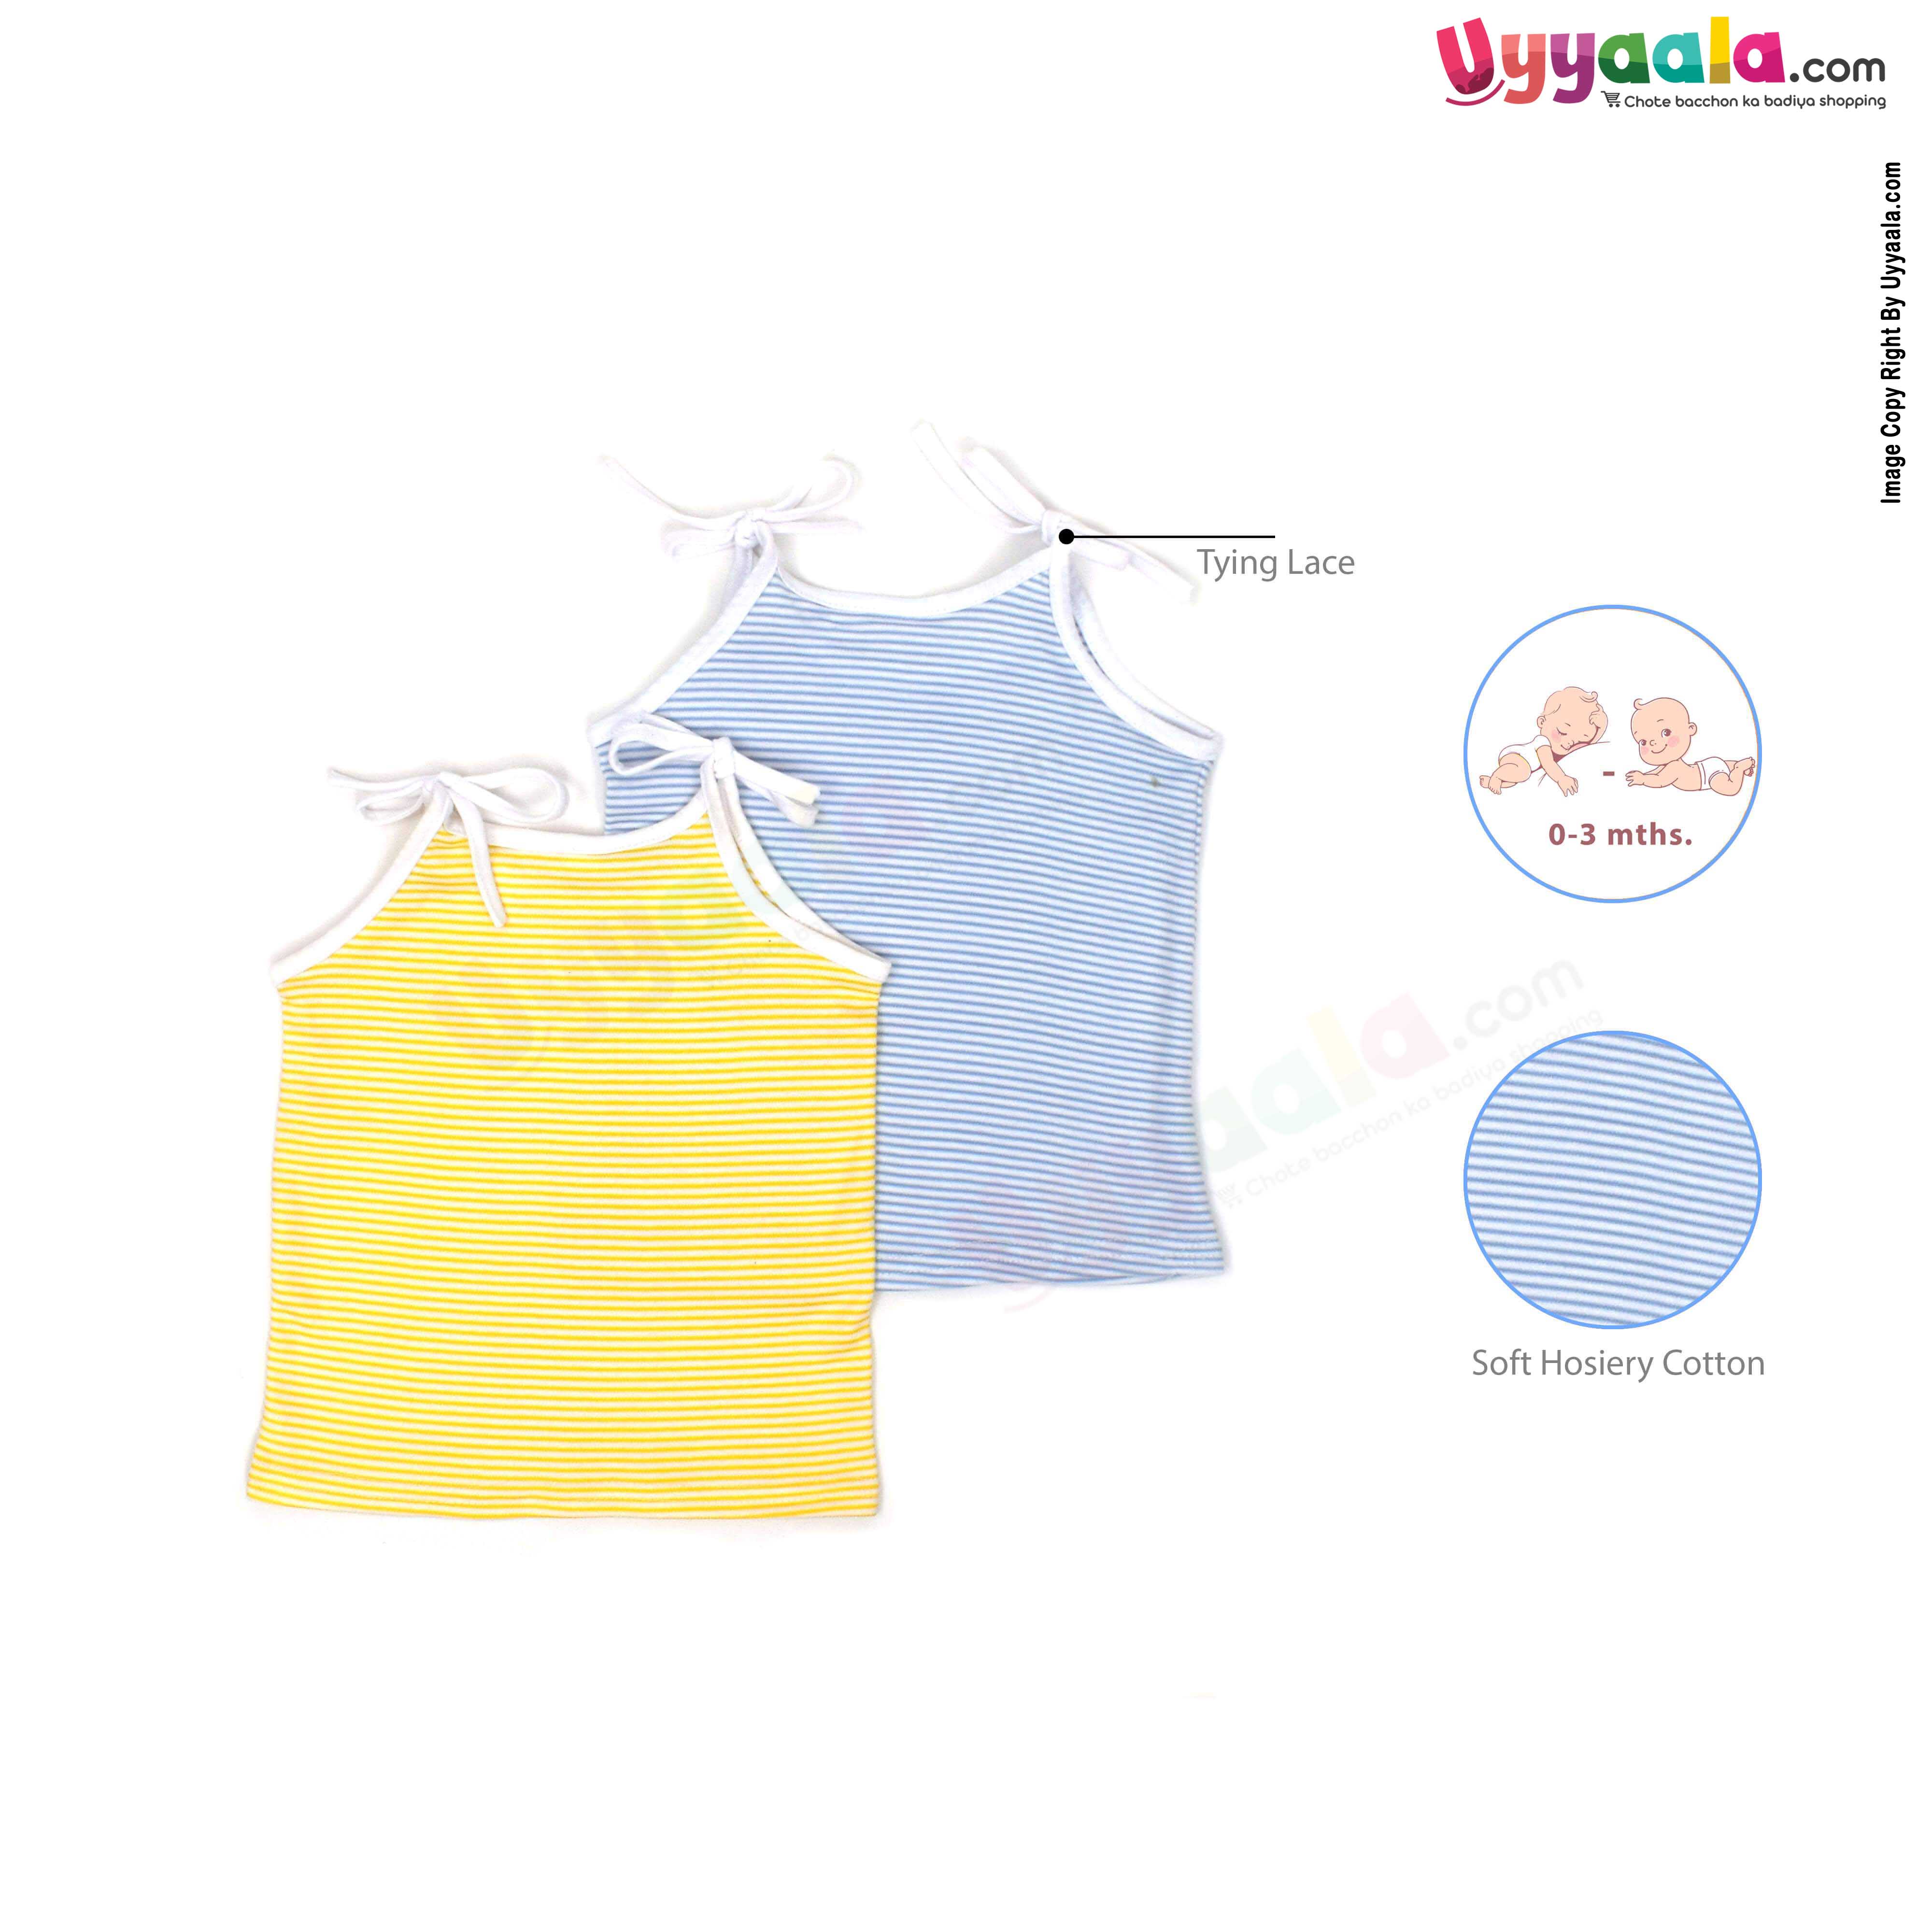 SNUG UP Sleeveless Baby Jabla Set, Top Opening Tie knot Lace Model, Premium Quality Cotton Baby Wear, Stripes Print, (0-3M), 2Pack - Blue & Yellow